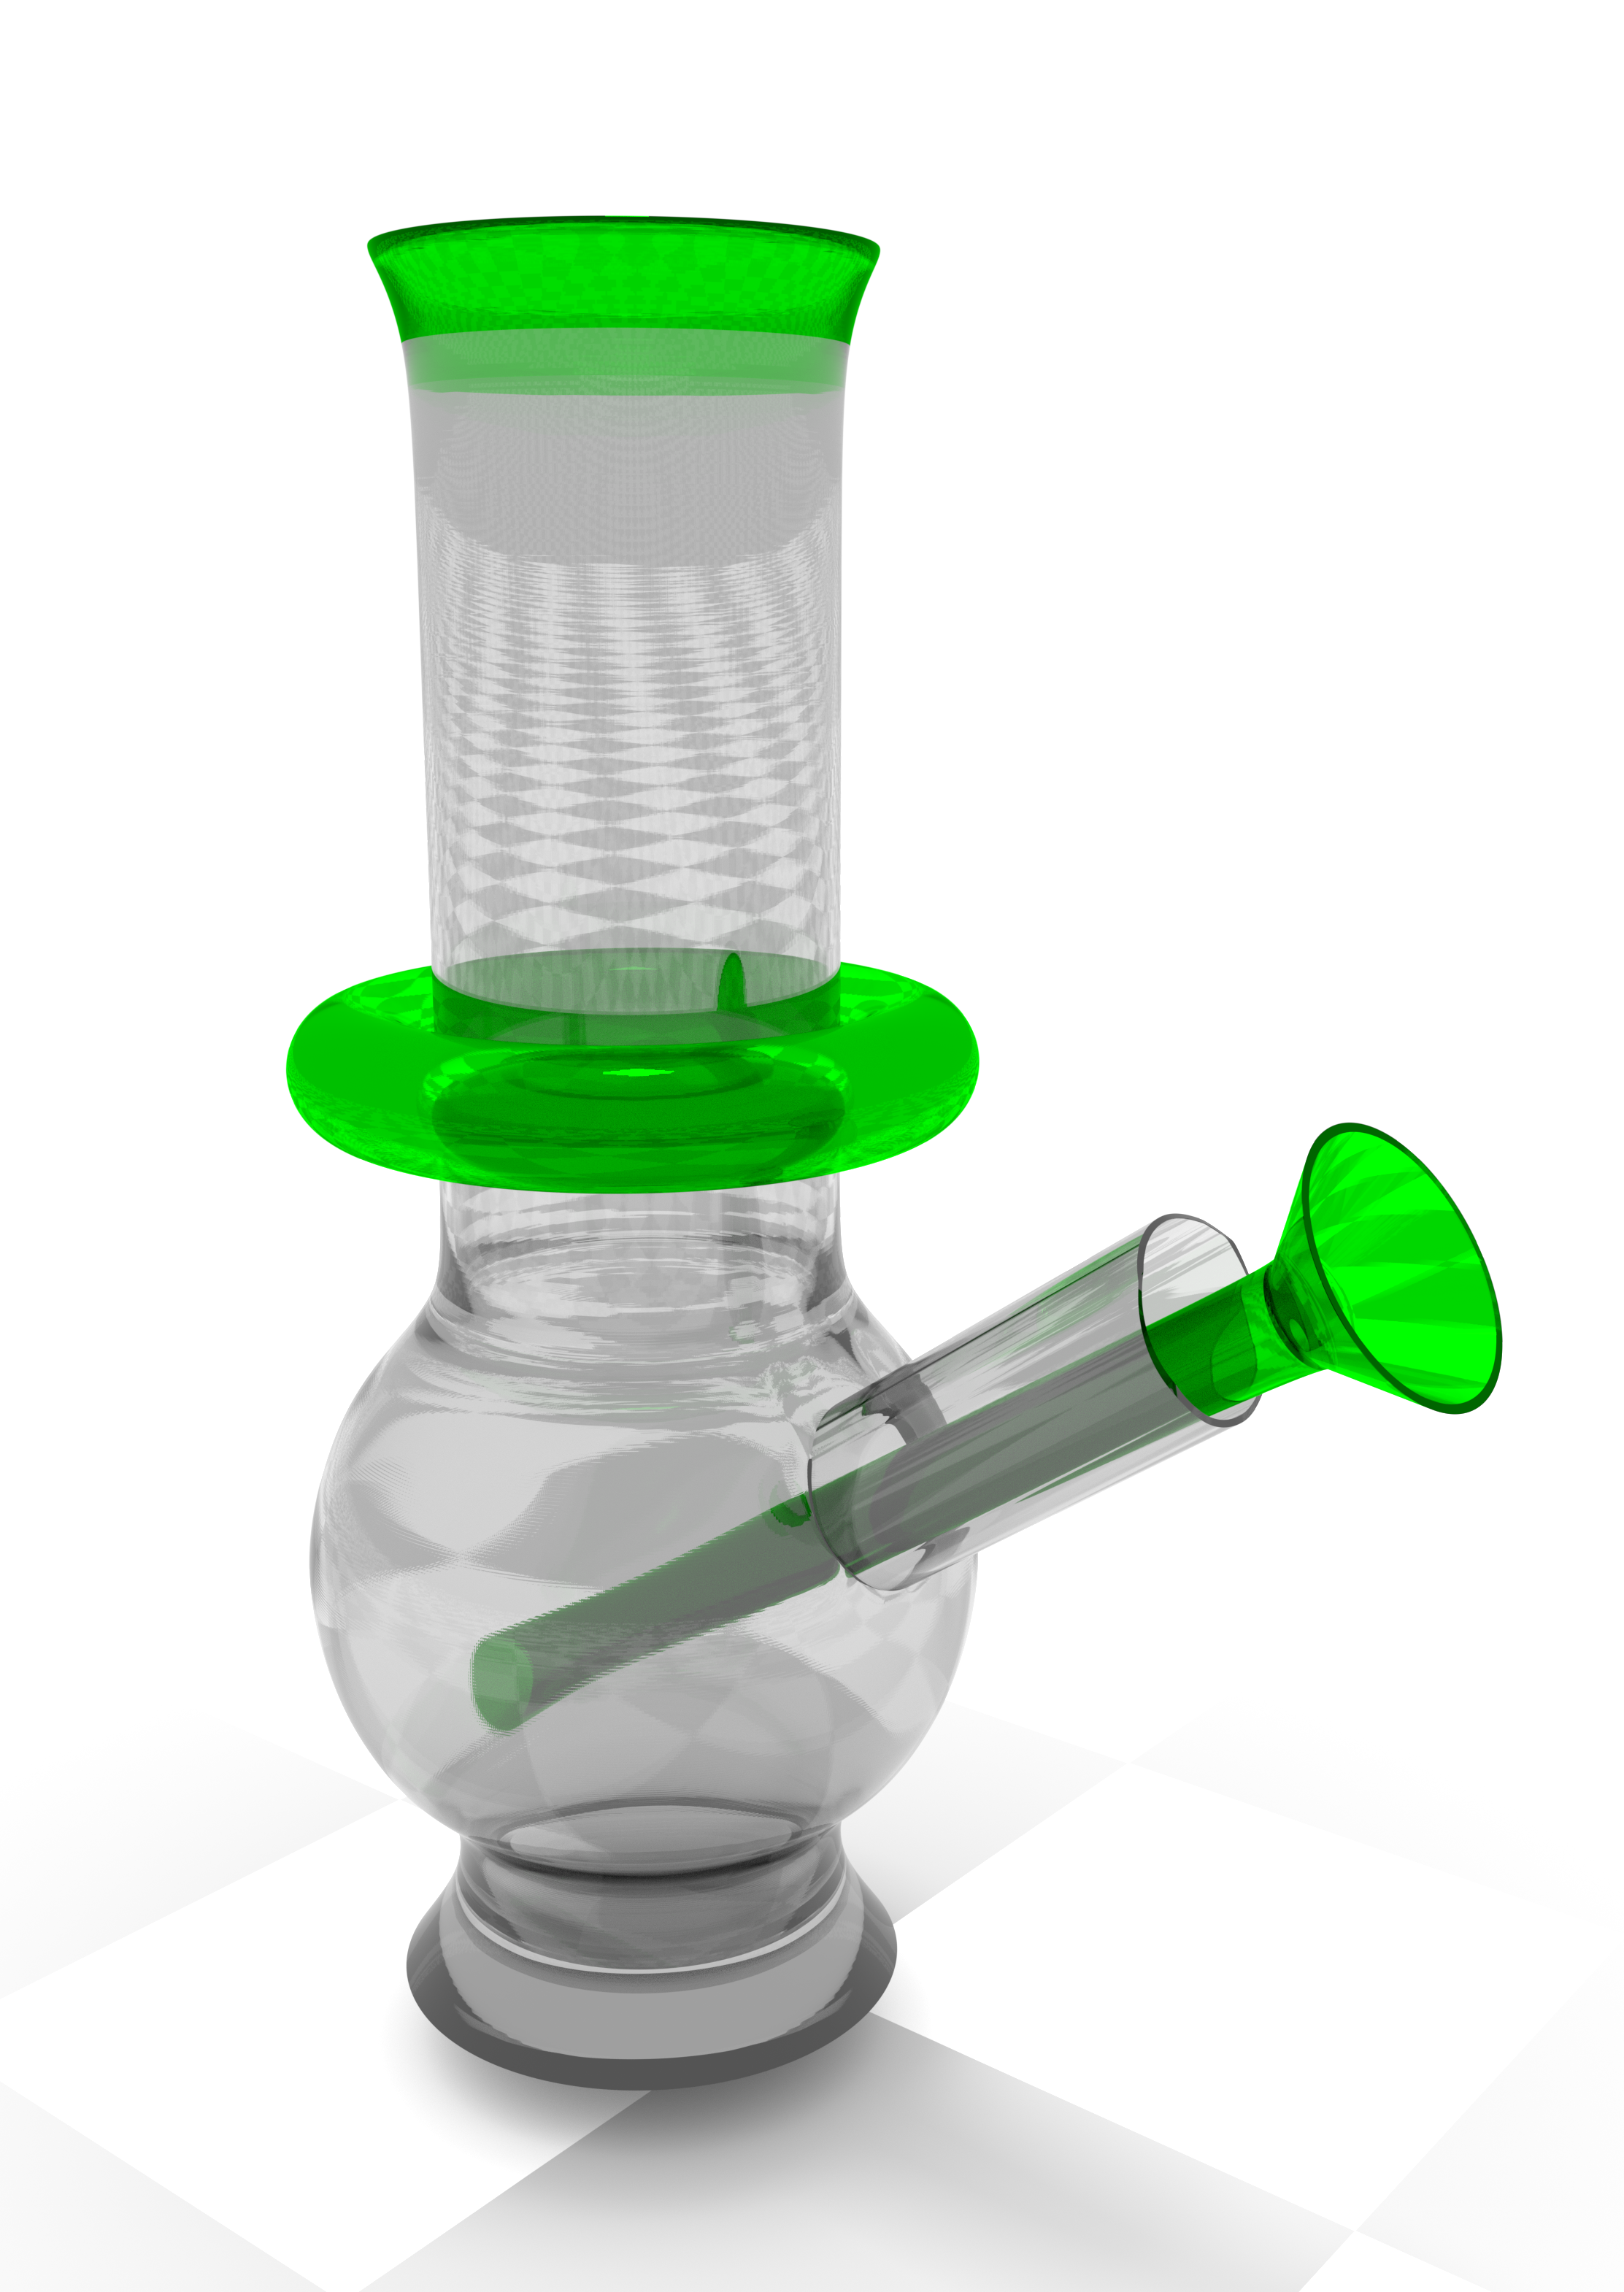 File:Bong.png - Wikimedia Commons